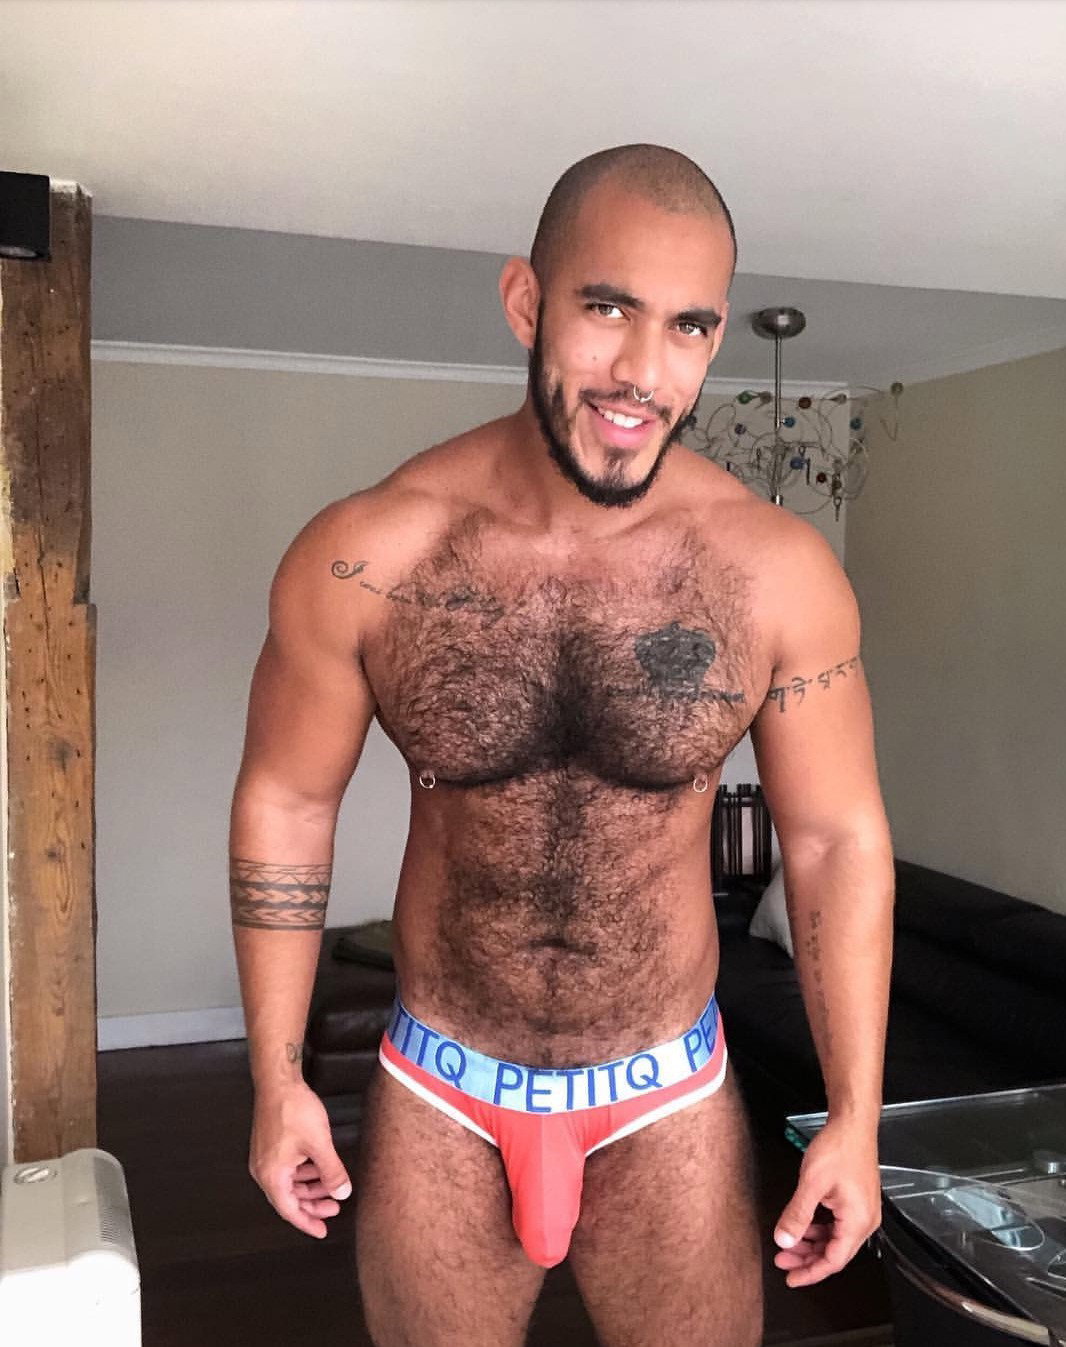 Photo by Smitty with the username @Resol702,  February 1, 2019 at 7:48 PM. The post is about the topic Gay Hairy Men